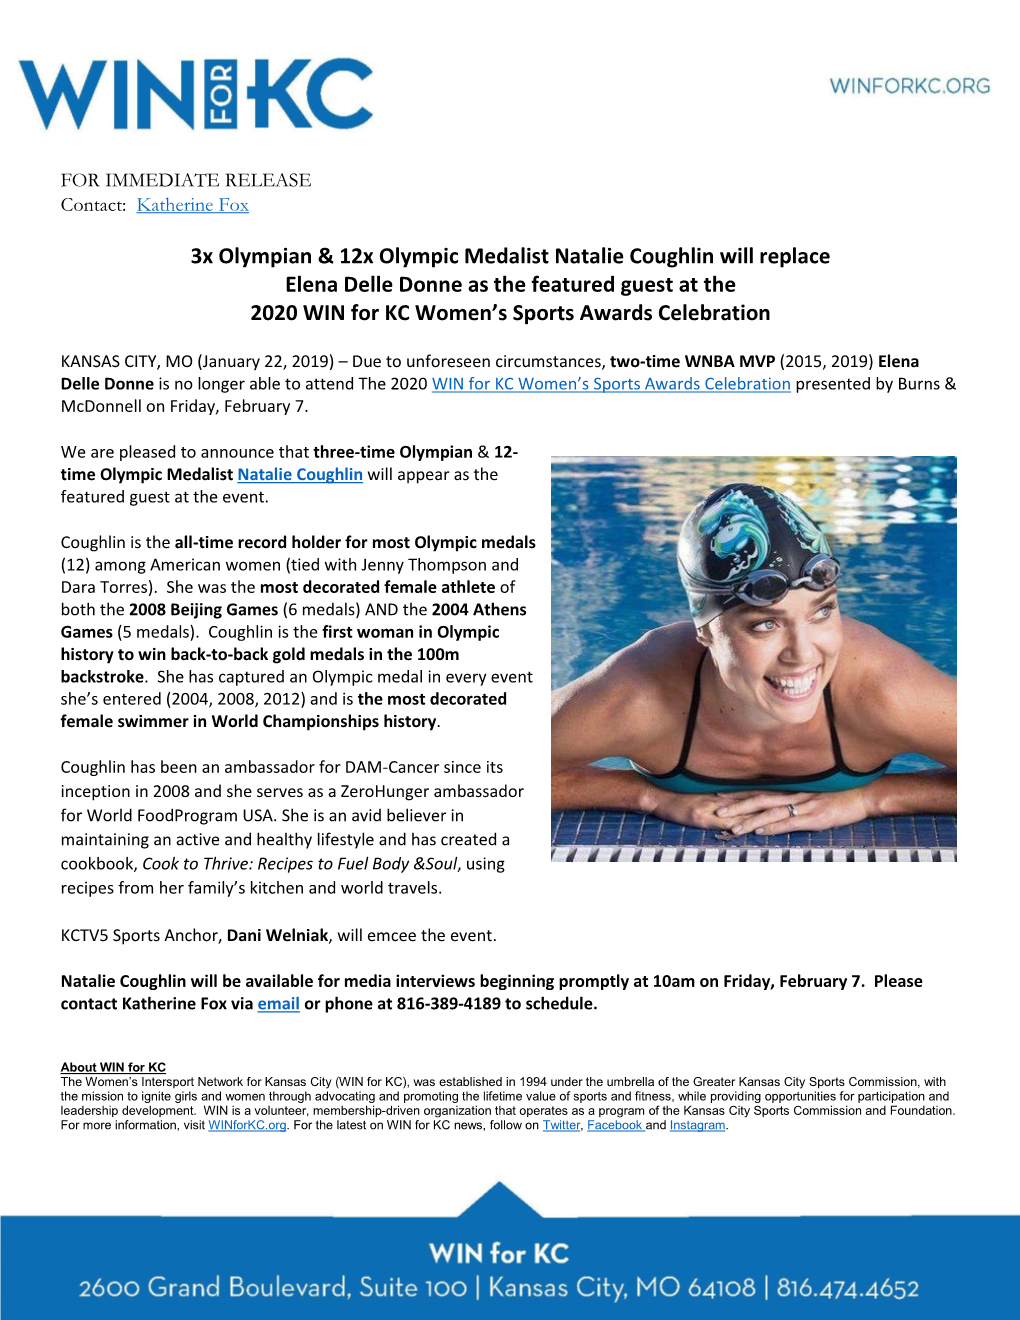 3X Olympian & 12X Olympic Medalist Natalie Coughlin Will Replace Elena